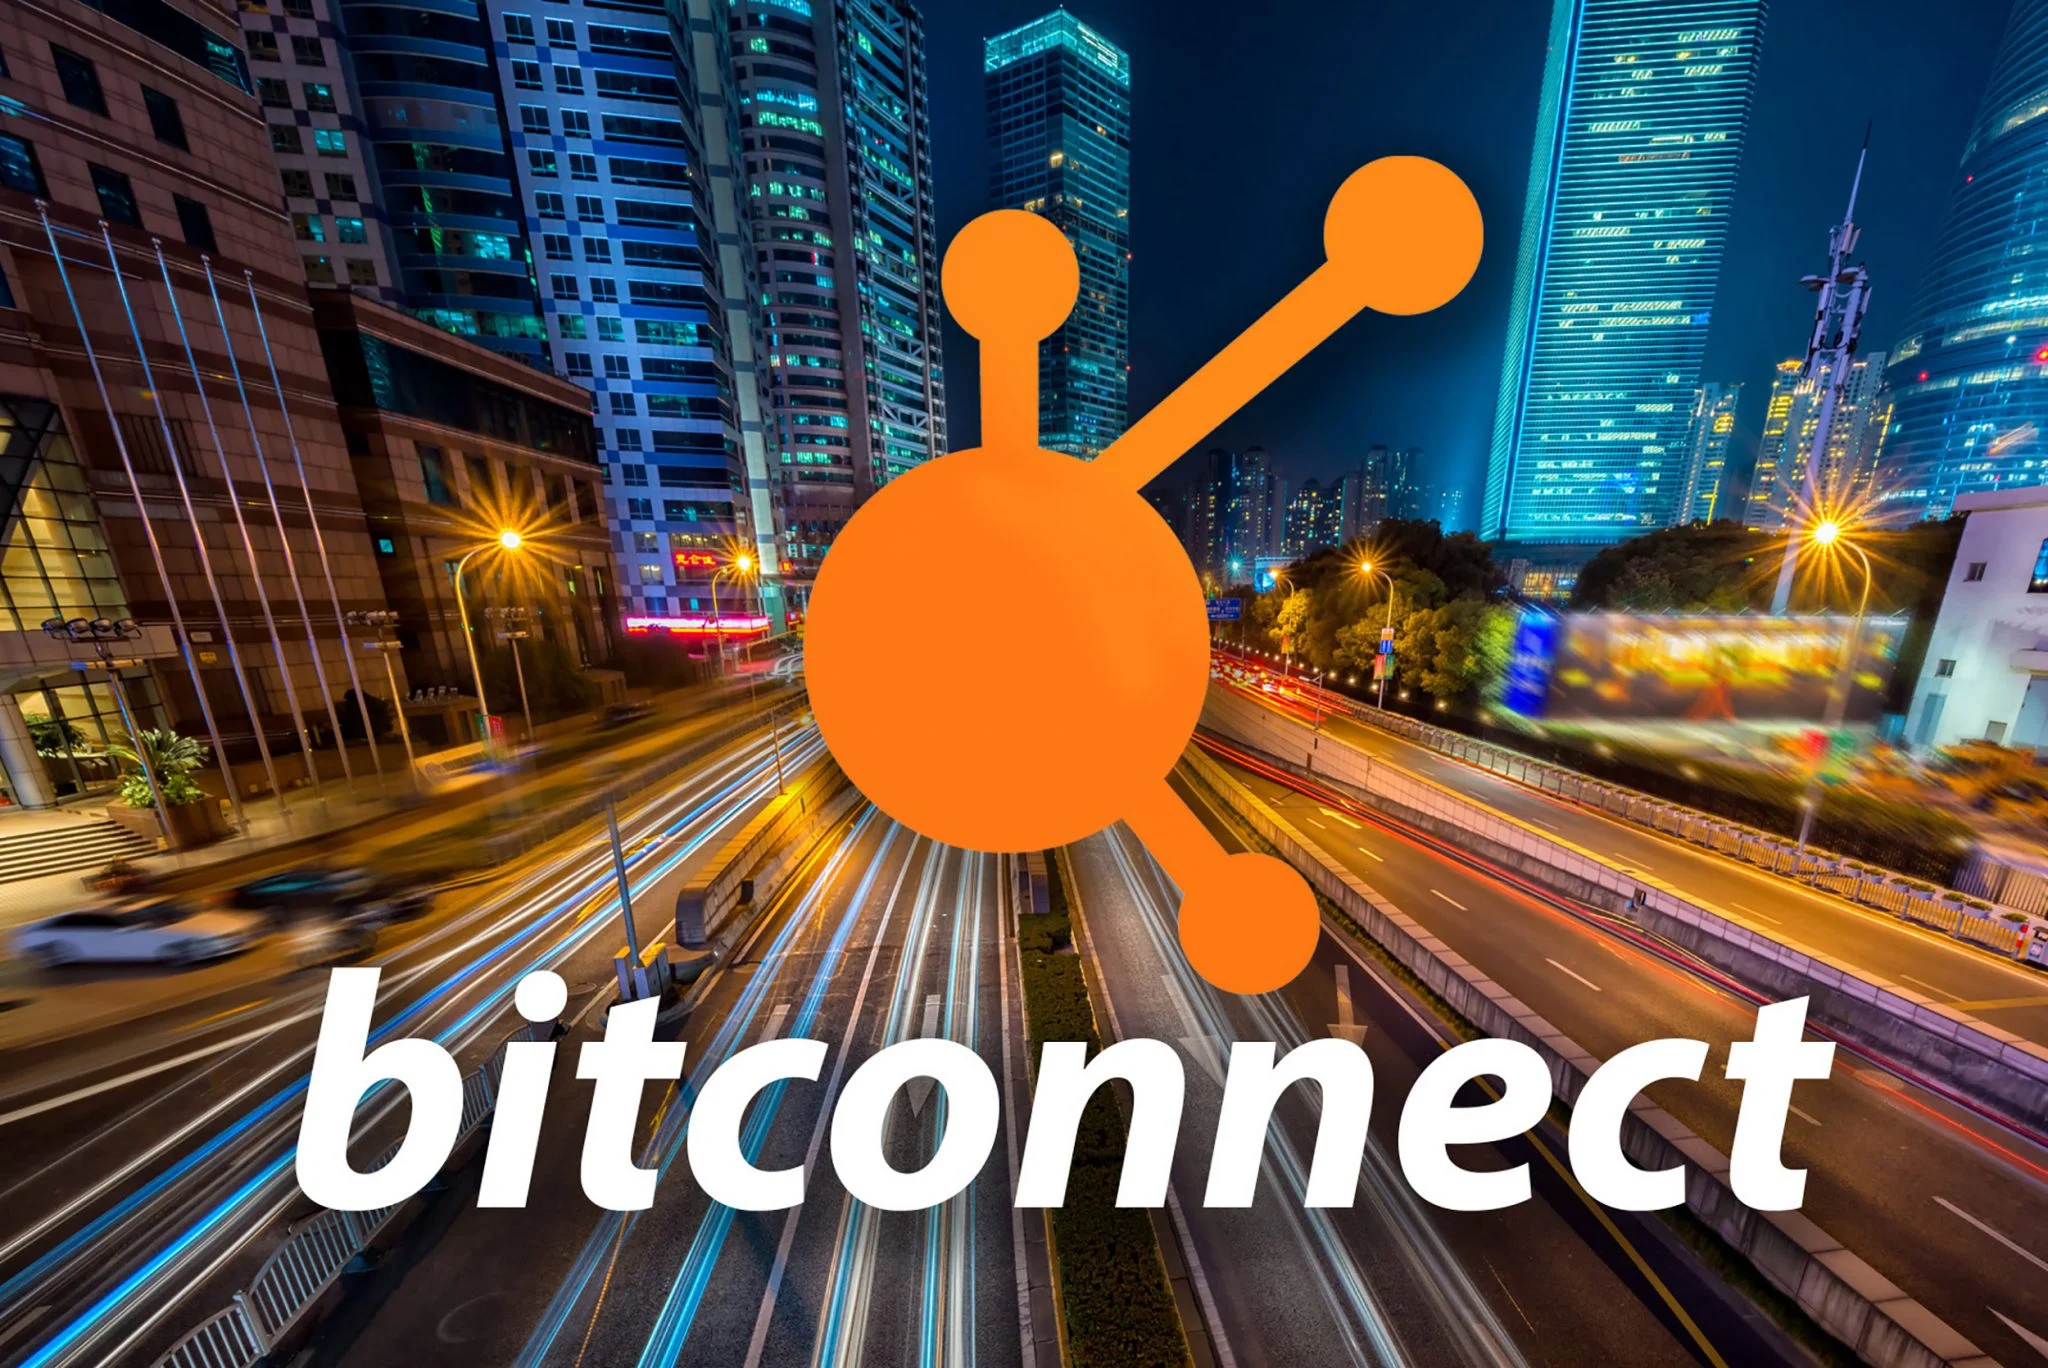 bitconnect-victims-to-receive-over-17-million-in-restitution-from-ponzi-scheme